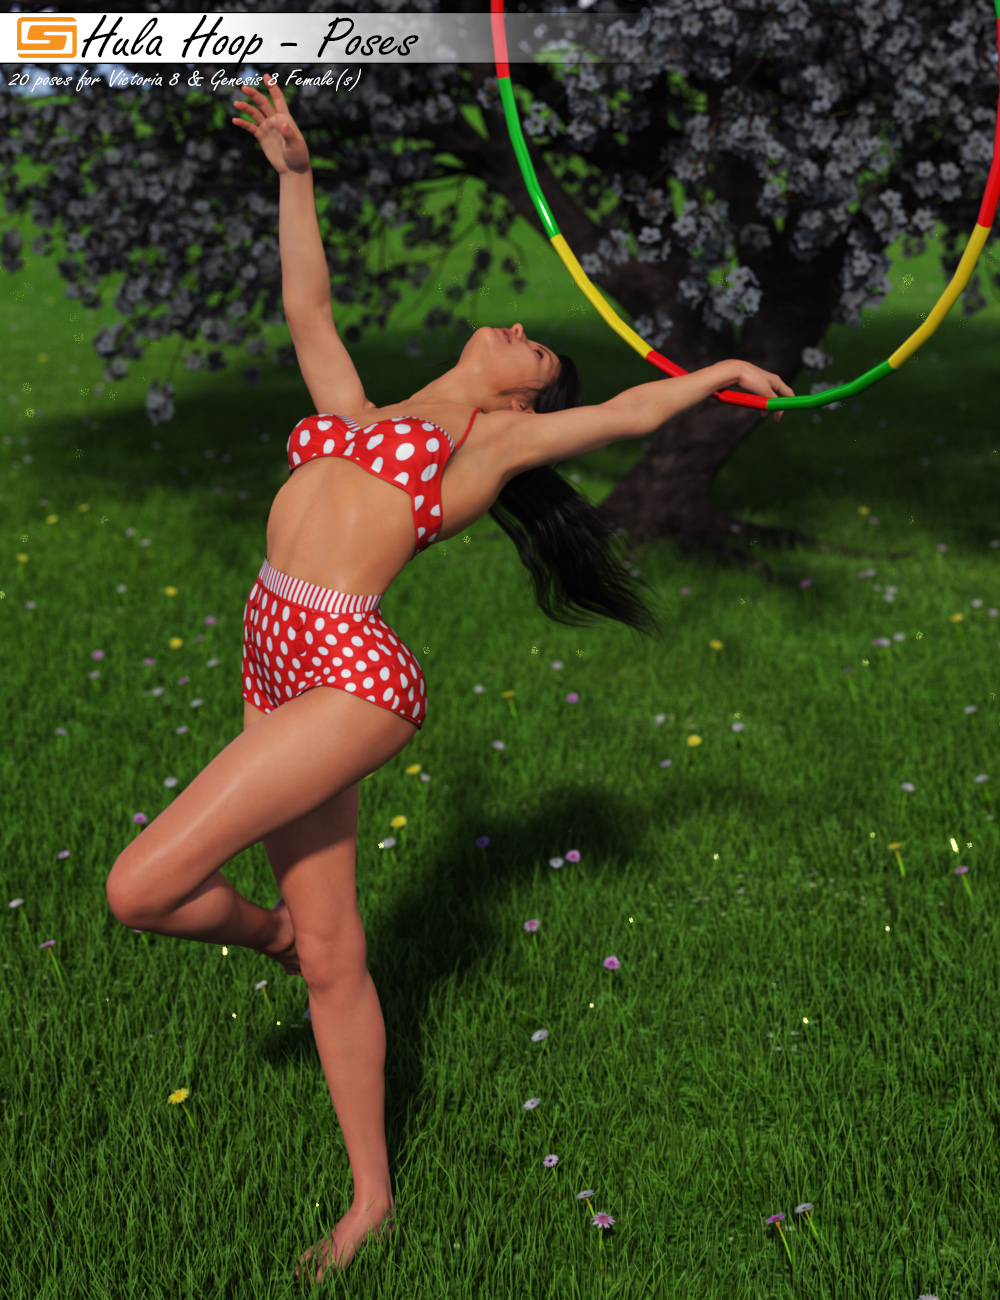 Hula Hoop - Poses for Victoria 8 and Genesis 8 Female(s) by: Sedor, 3D Models by Daz 3D